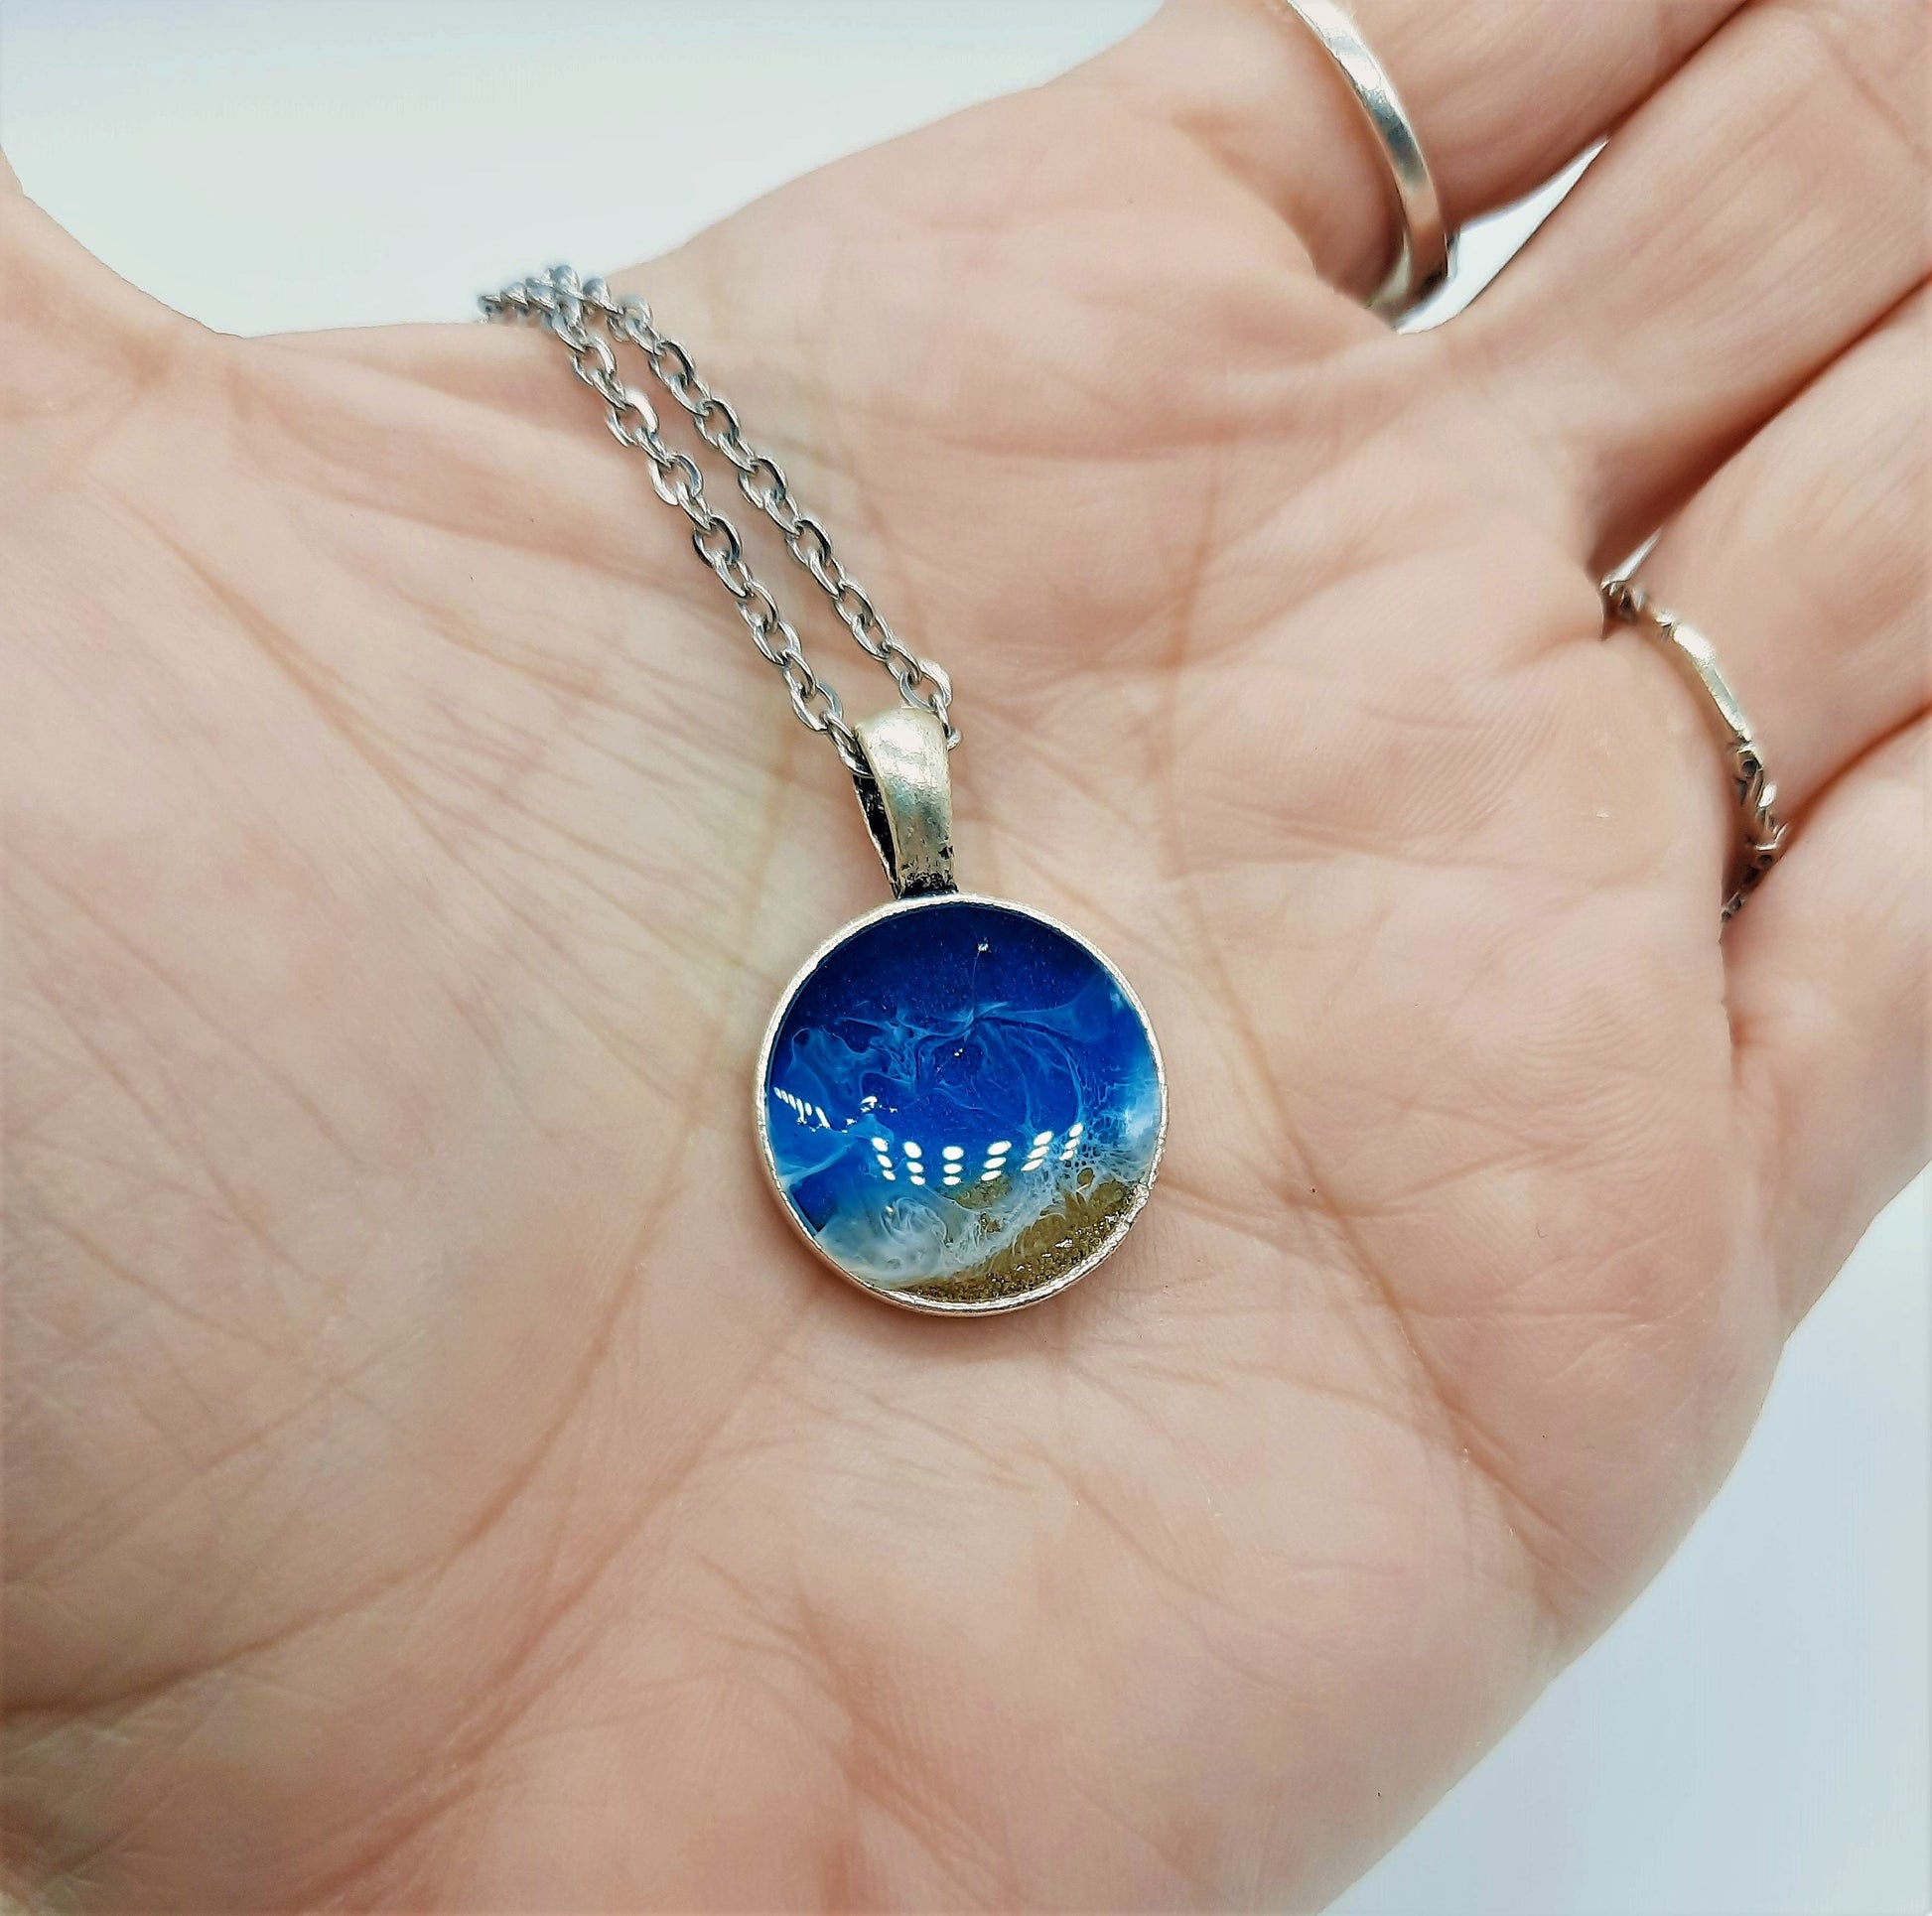 Resin Waves Small Round Shaped Ocean Pendant / Beach Scene Necklace, Handmade with Resin & Real Sand - One of a Kind - Not a Photograph!